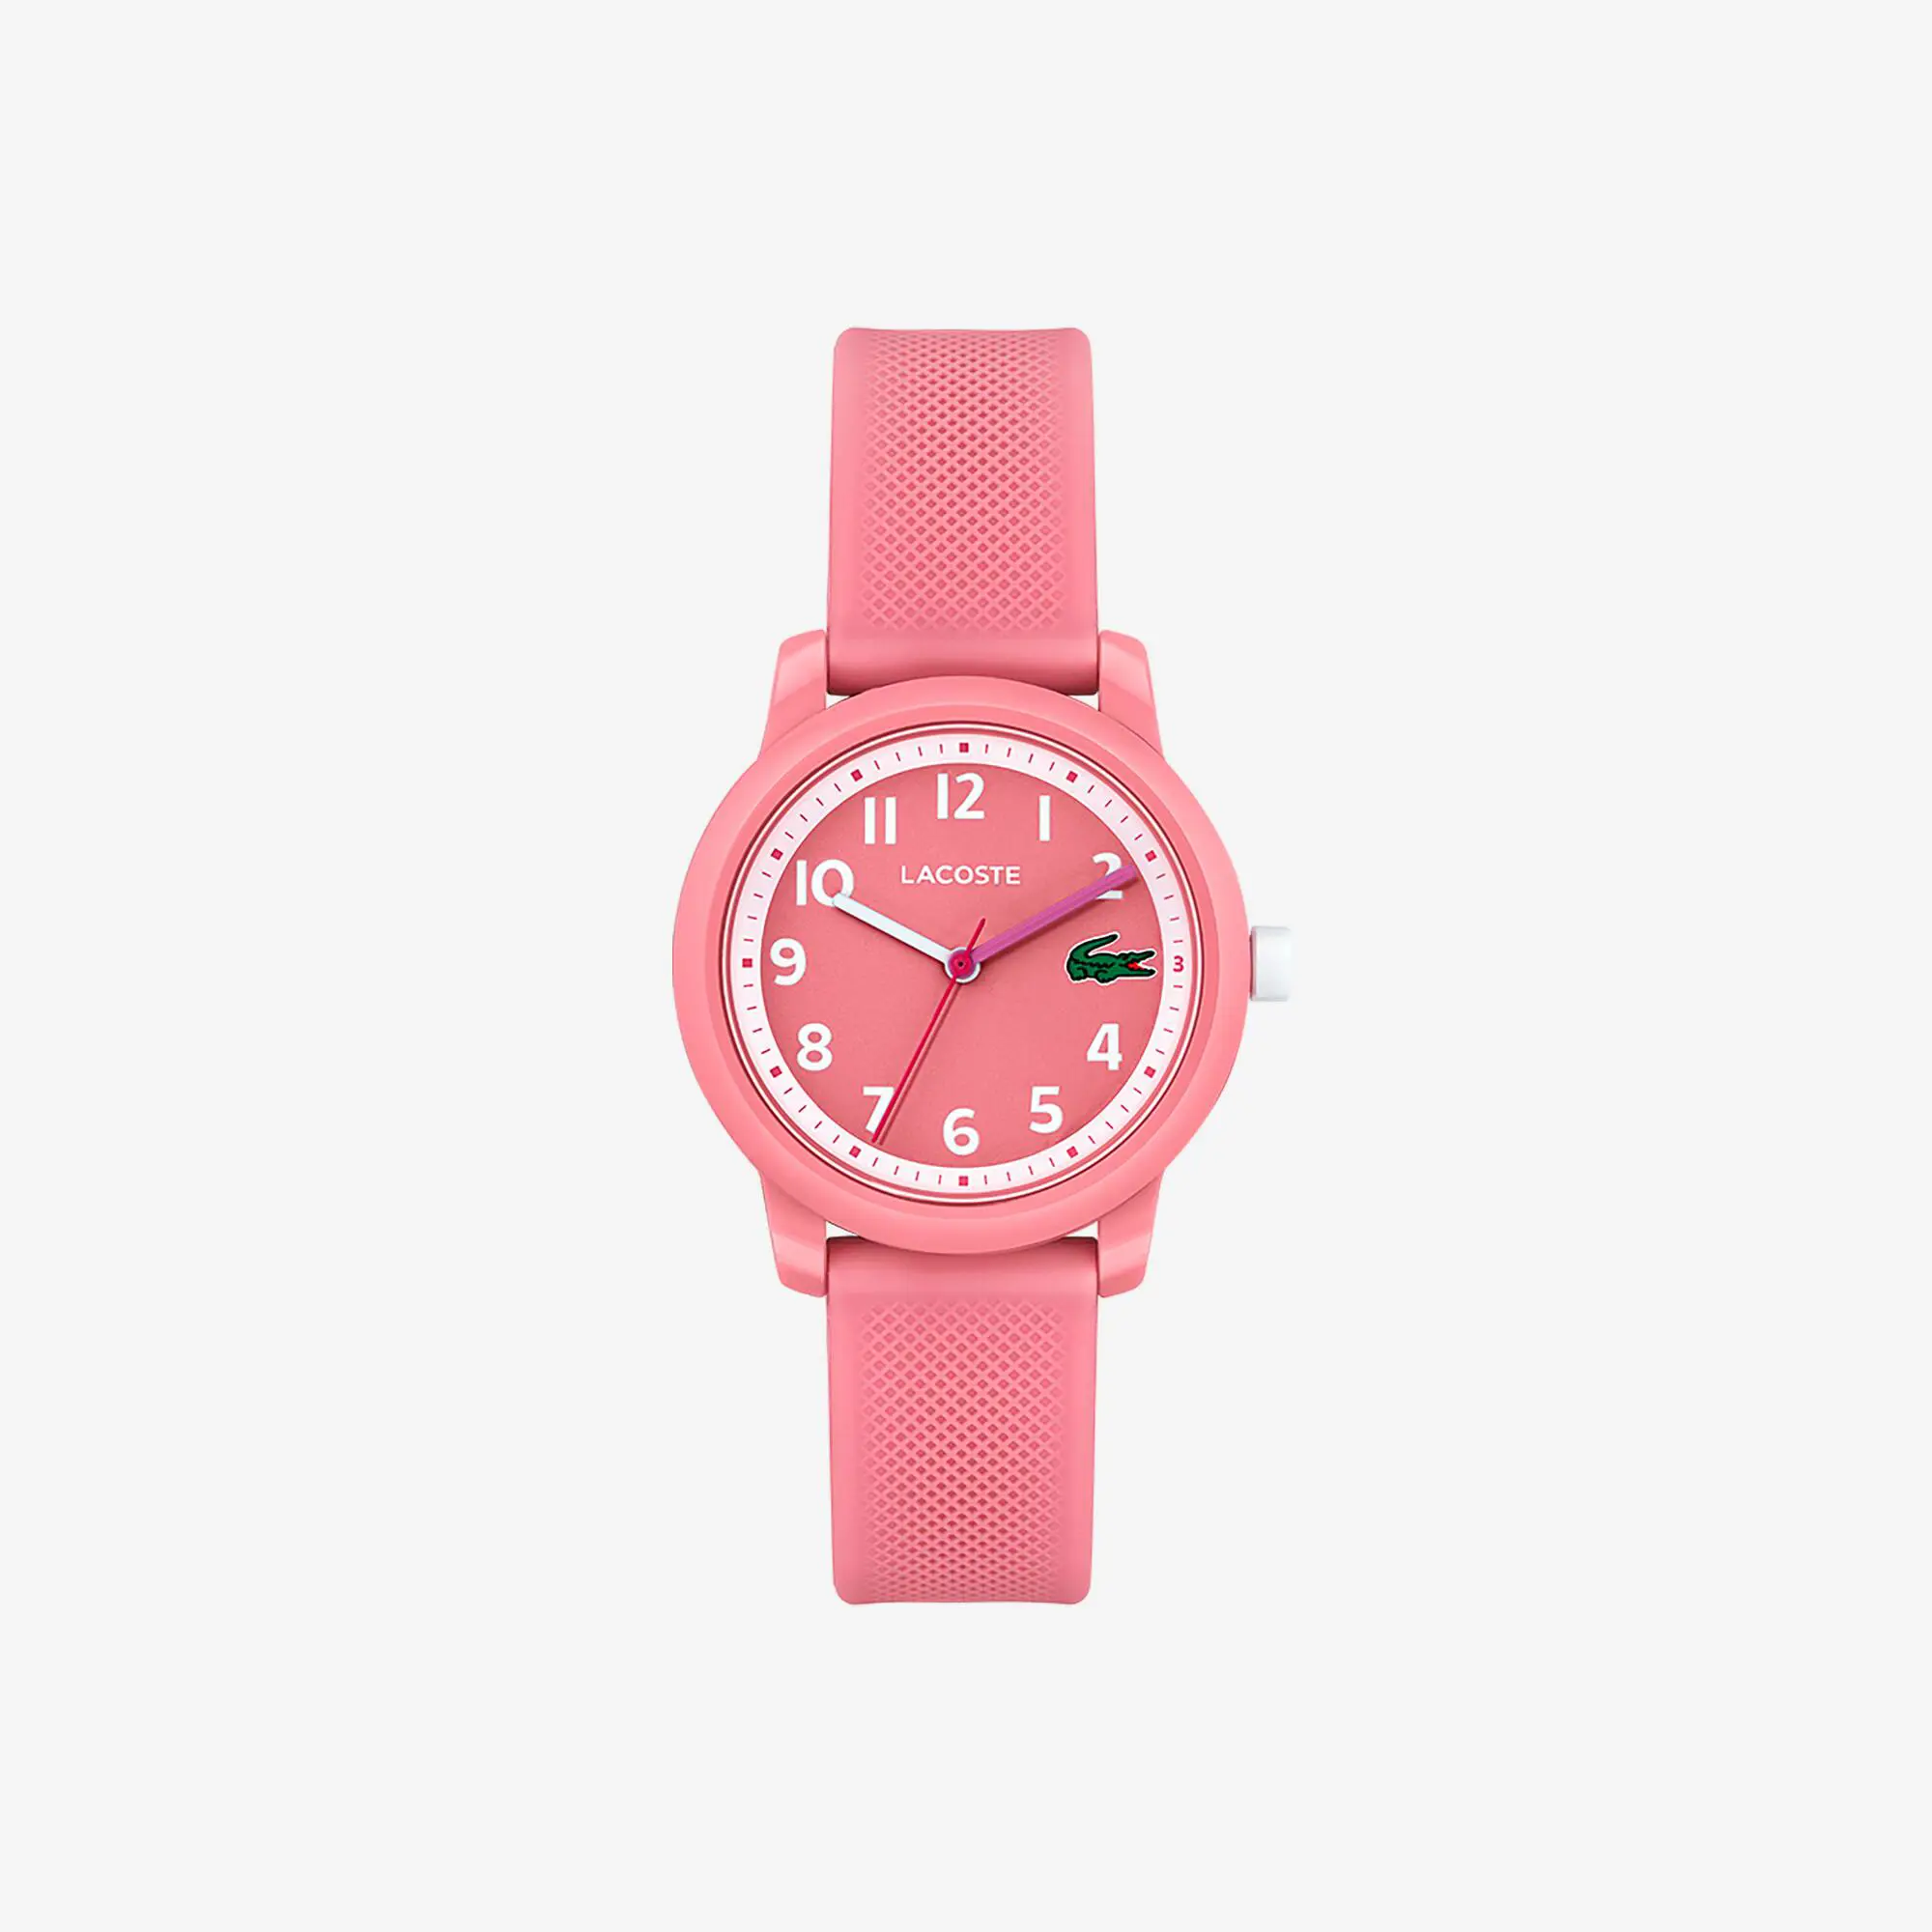 Lacoste Kids’ Lacoste.12.12 Pink Silicone Strap Watch. 2